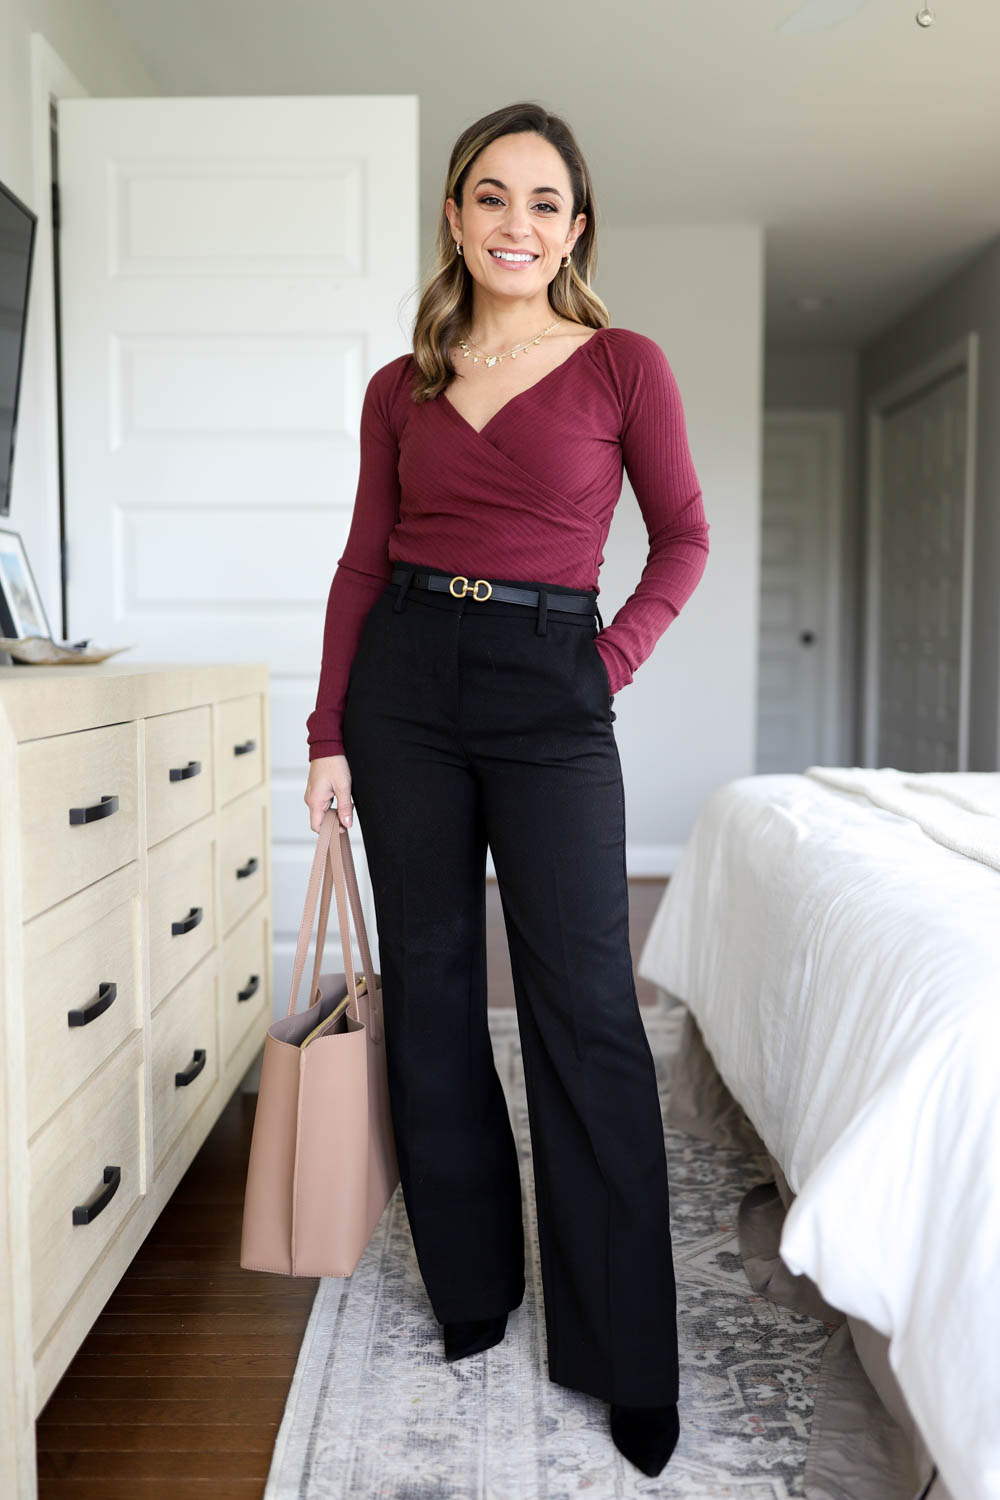 Wide-Leg Trousers Four Ways for Work - Pumps & Push Ups  Petite work  outfits, Work outfits women, Business casual outfits for work